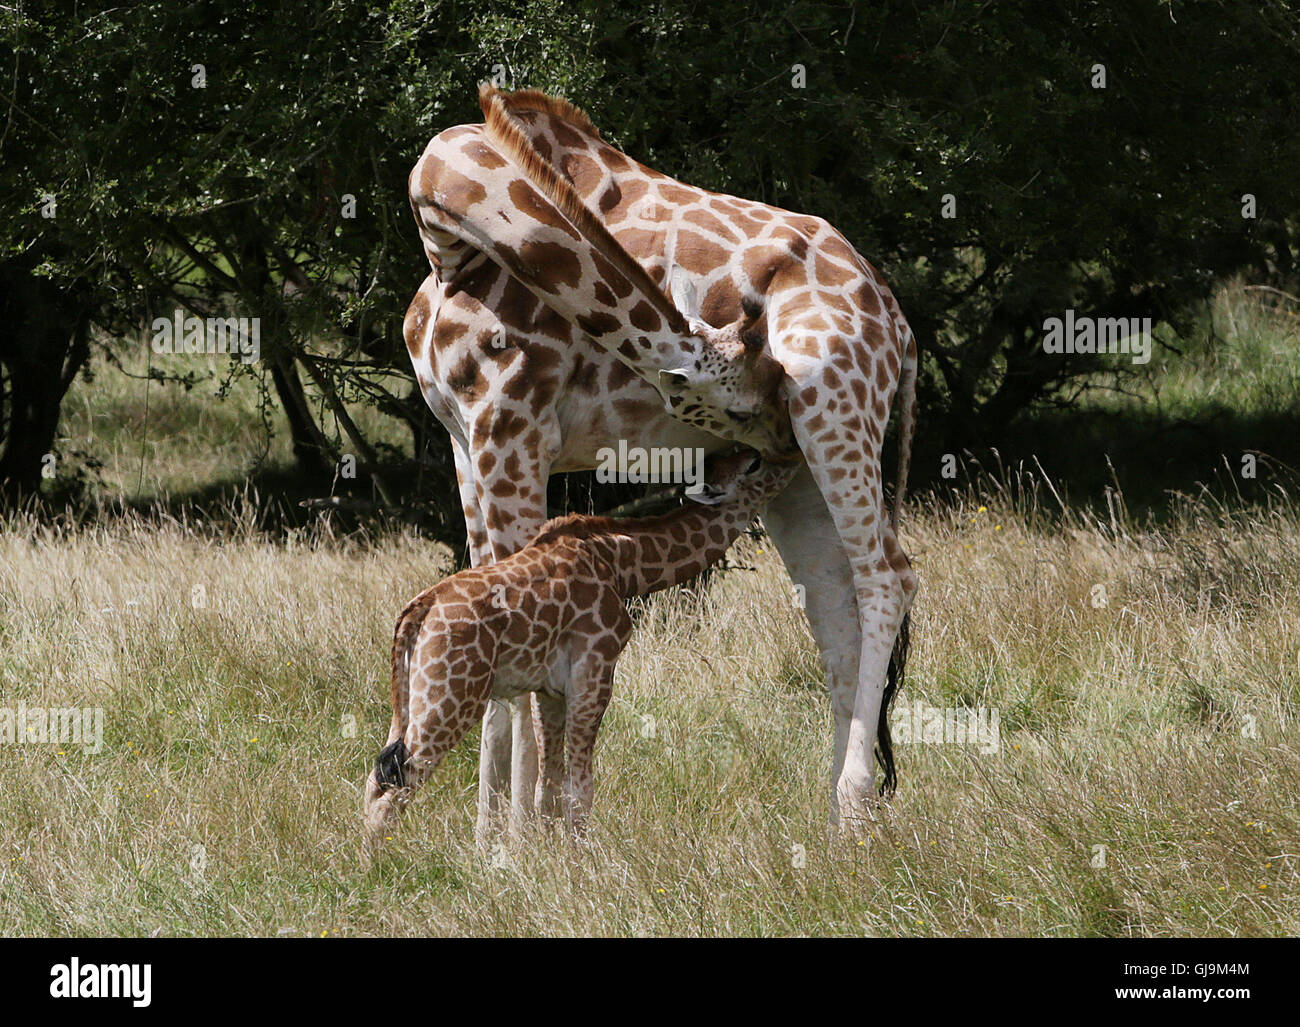 An as yet unnamed female Rothschild Giraffe calf with her mother Lunar, exploring her new surroundings of over 600 acres of animal reserve at Port Lympne Reserve near Ashford in Kent. Stock Photo